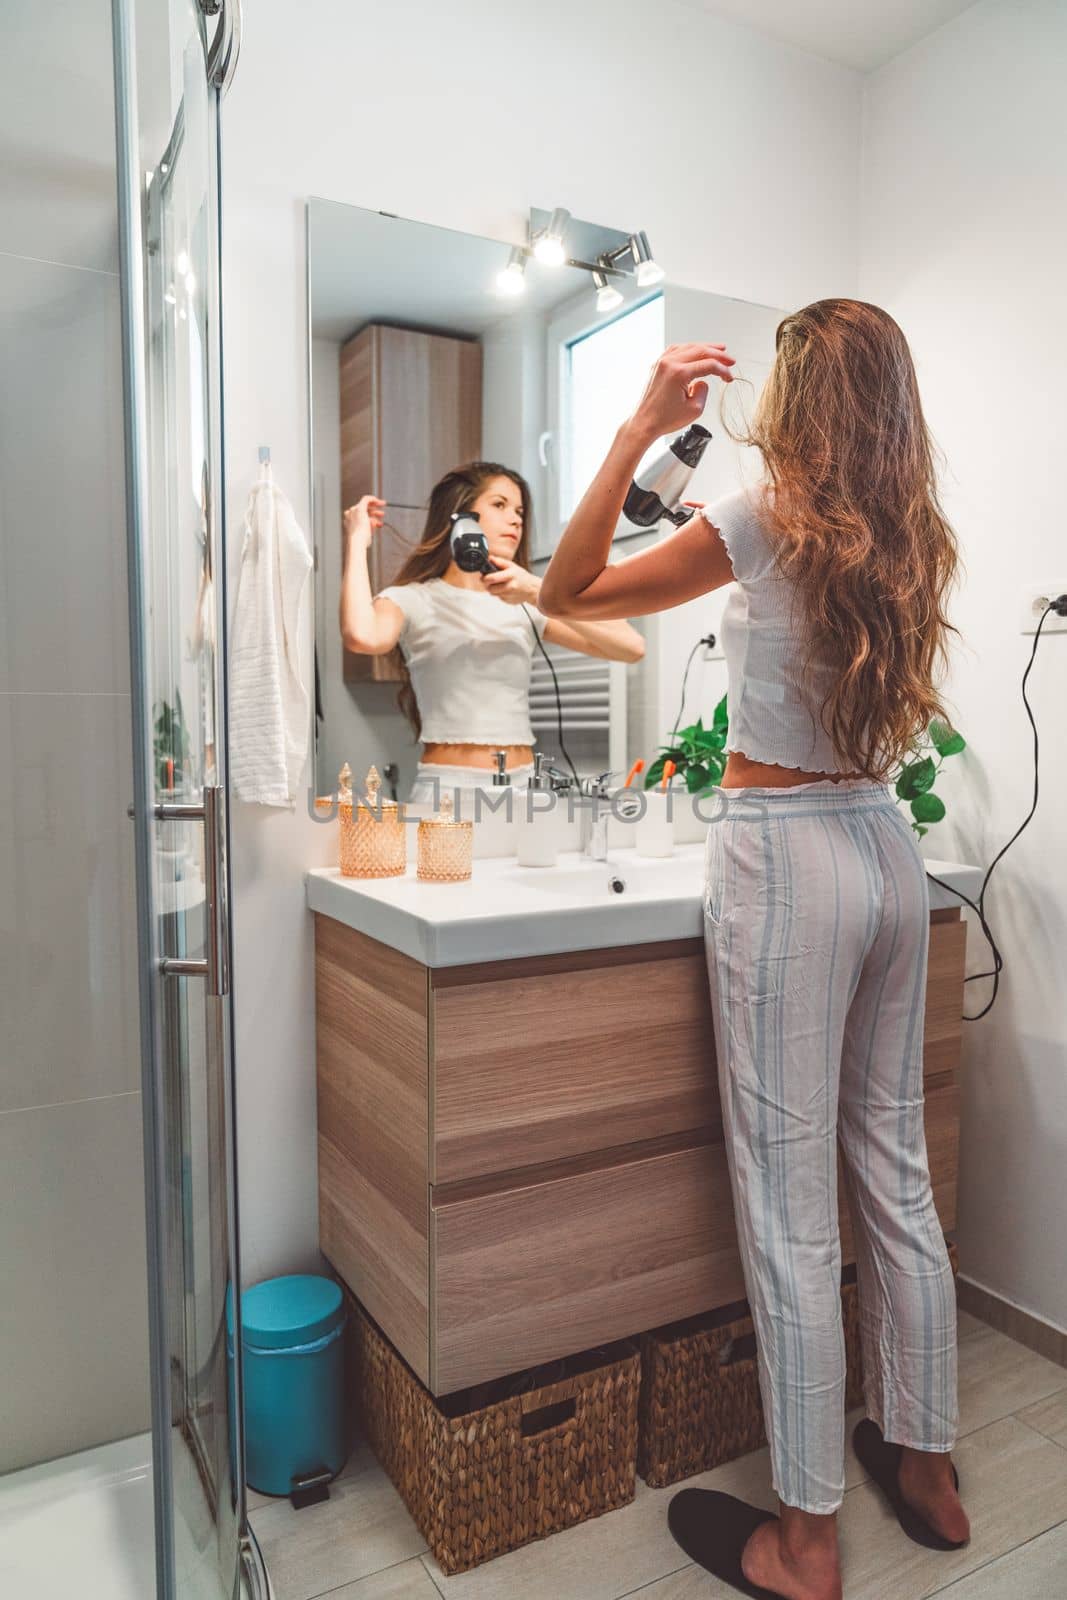 Vertical photo of young caucasian woman standing at the bathroom sink drying her hair with a hair dryer by VisualProductions